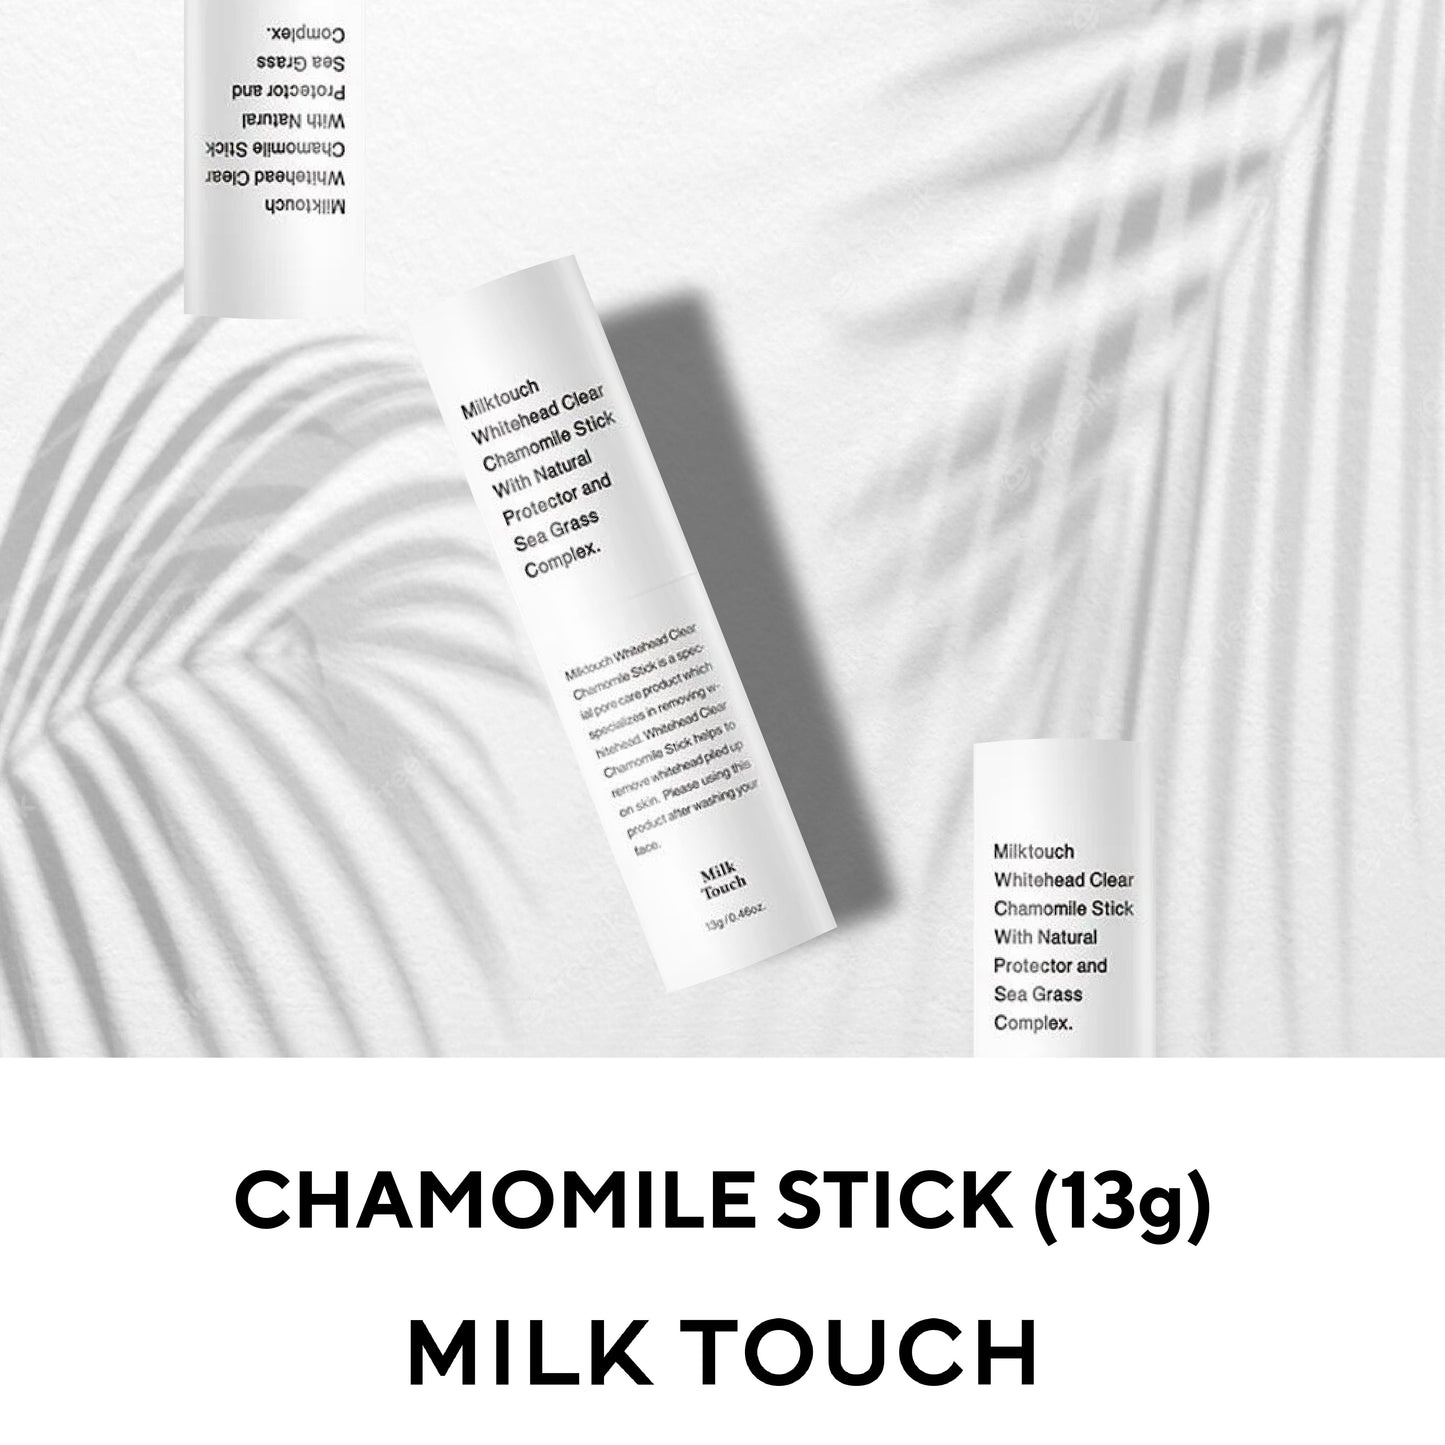 MILK TOUCH Whitehead Clear Chamomile Stick (13gr)